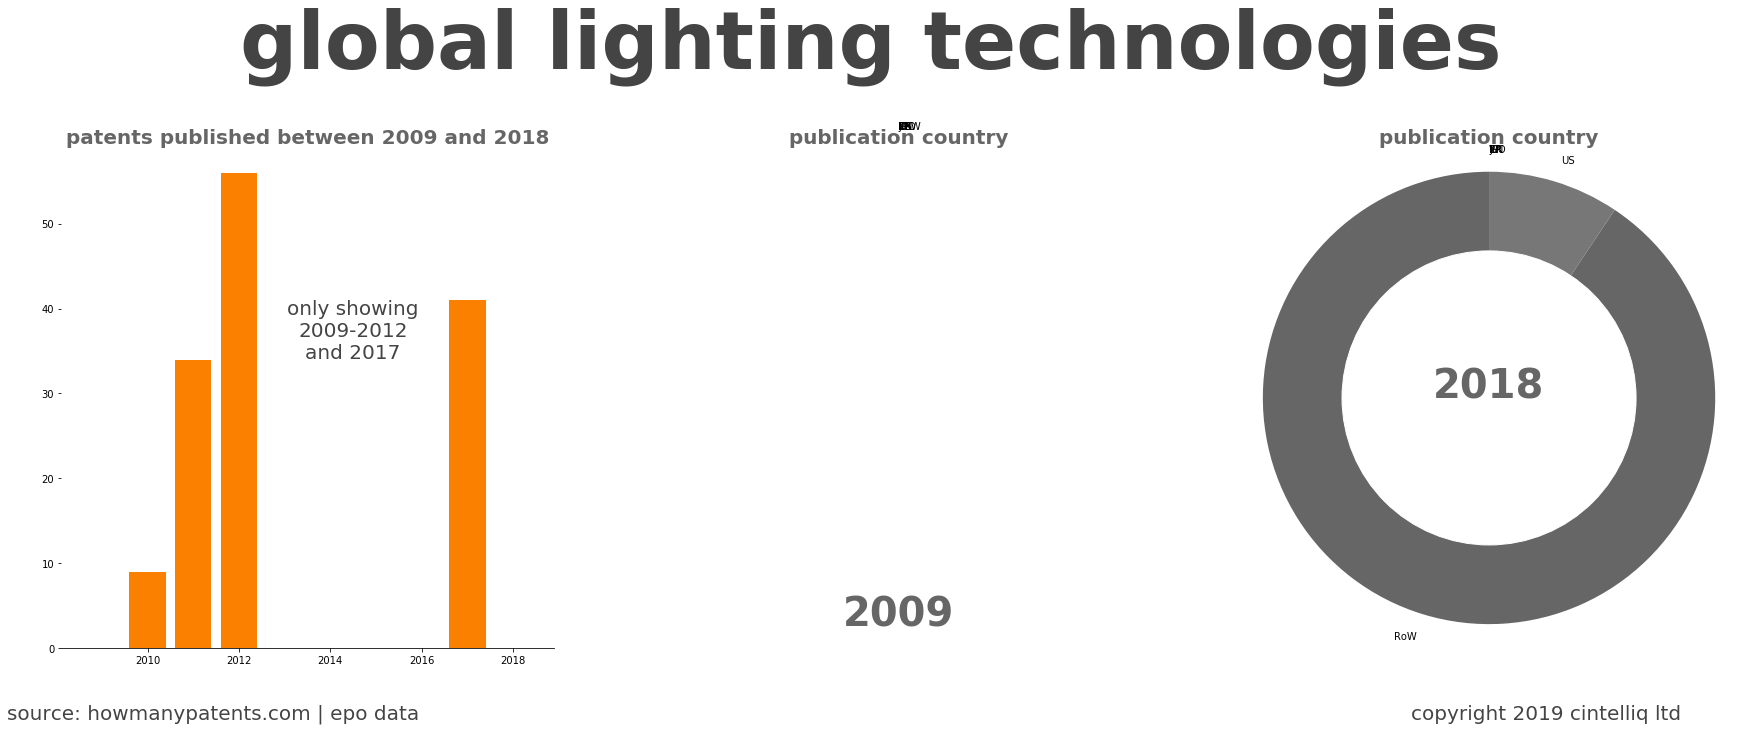 summary of patents for Global Lighting Technologies